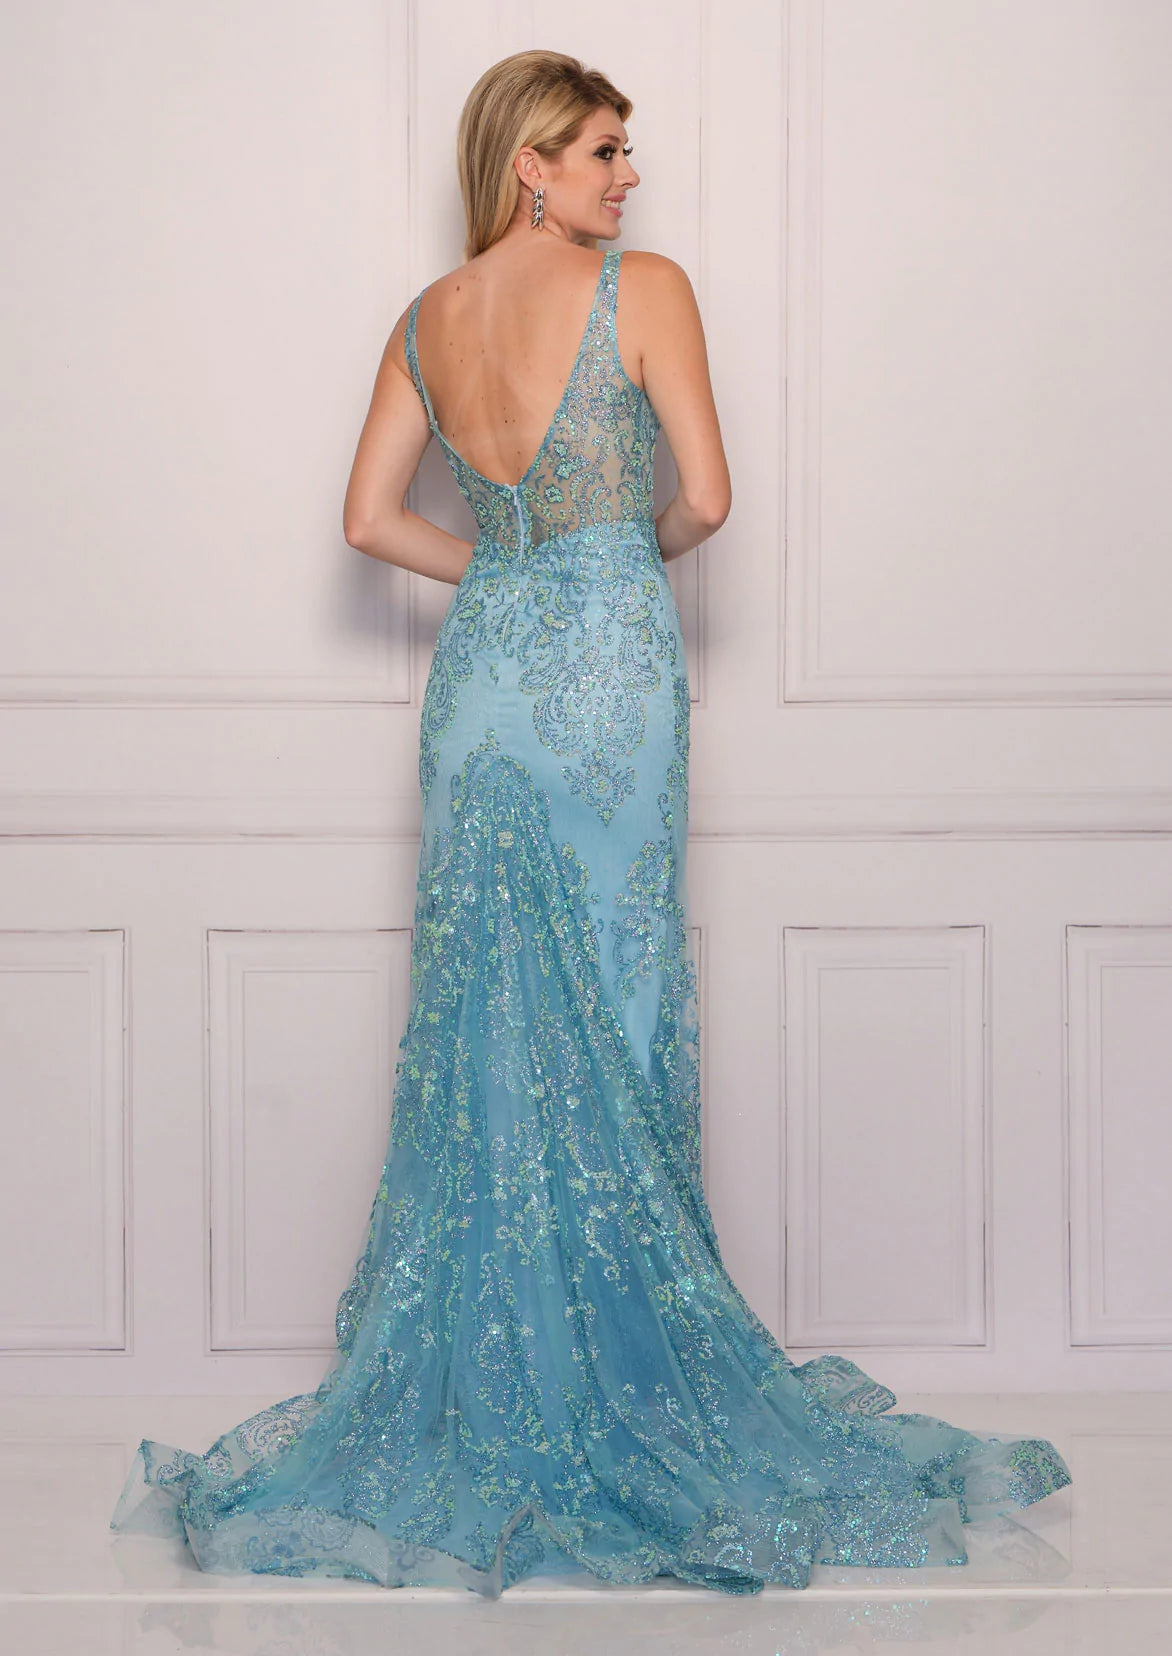 Dave & Johnny 11089 Long Fitted Sheer Prom Dress Slit Pageant Gown Glitter Formal   Sizes: 0-16  Colors: Blue